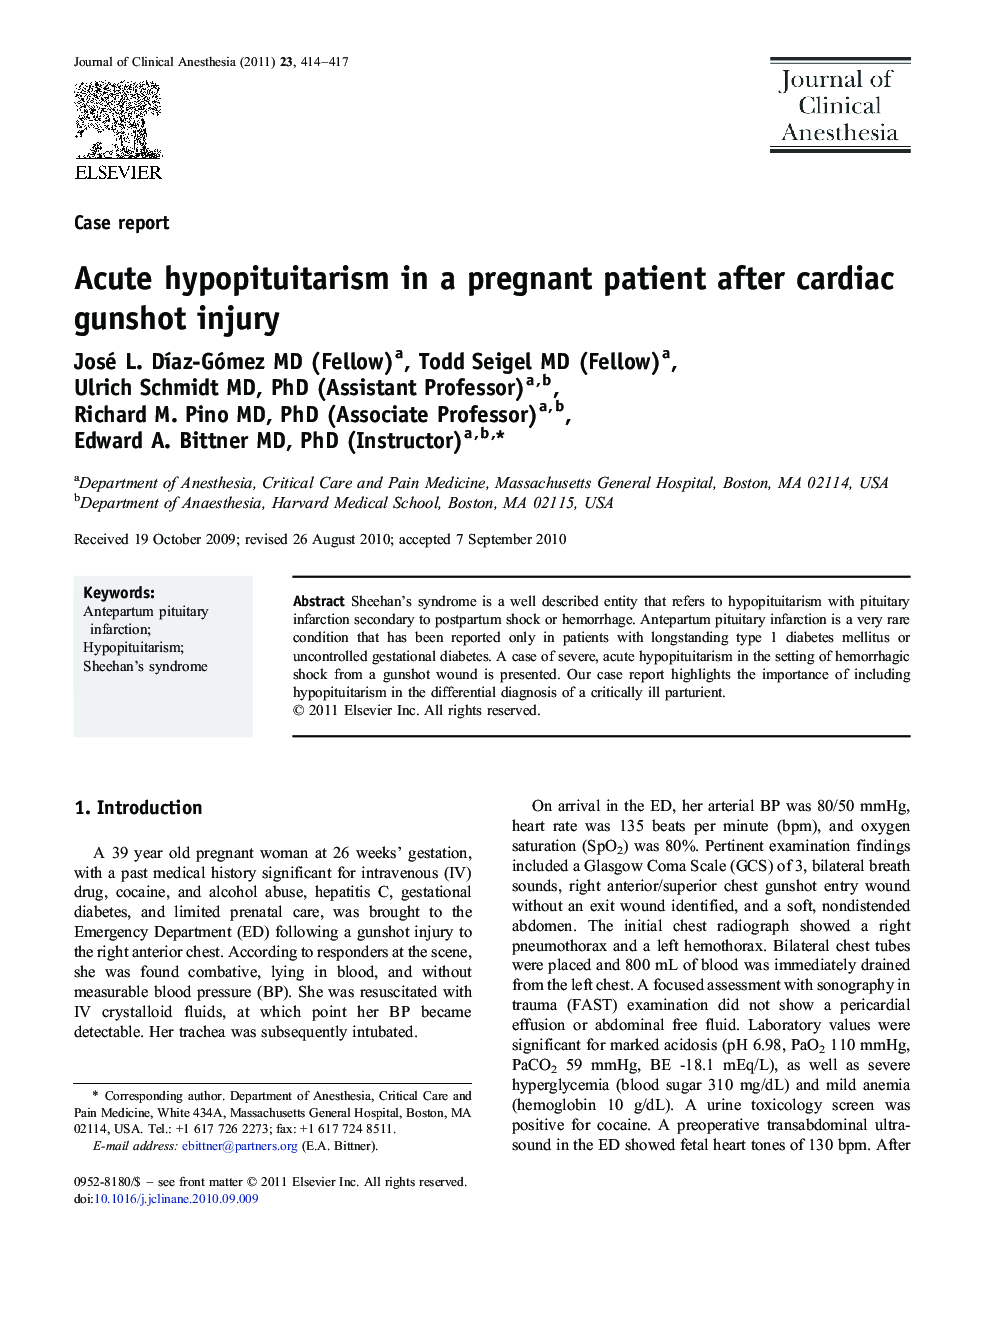 Acute hypopituitarism in a pregnant patient after cardiac gunshot injury